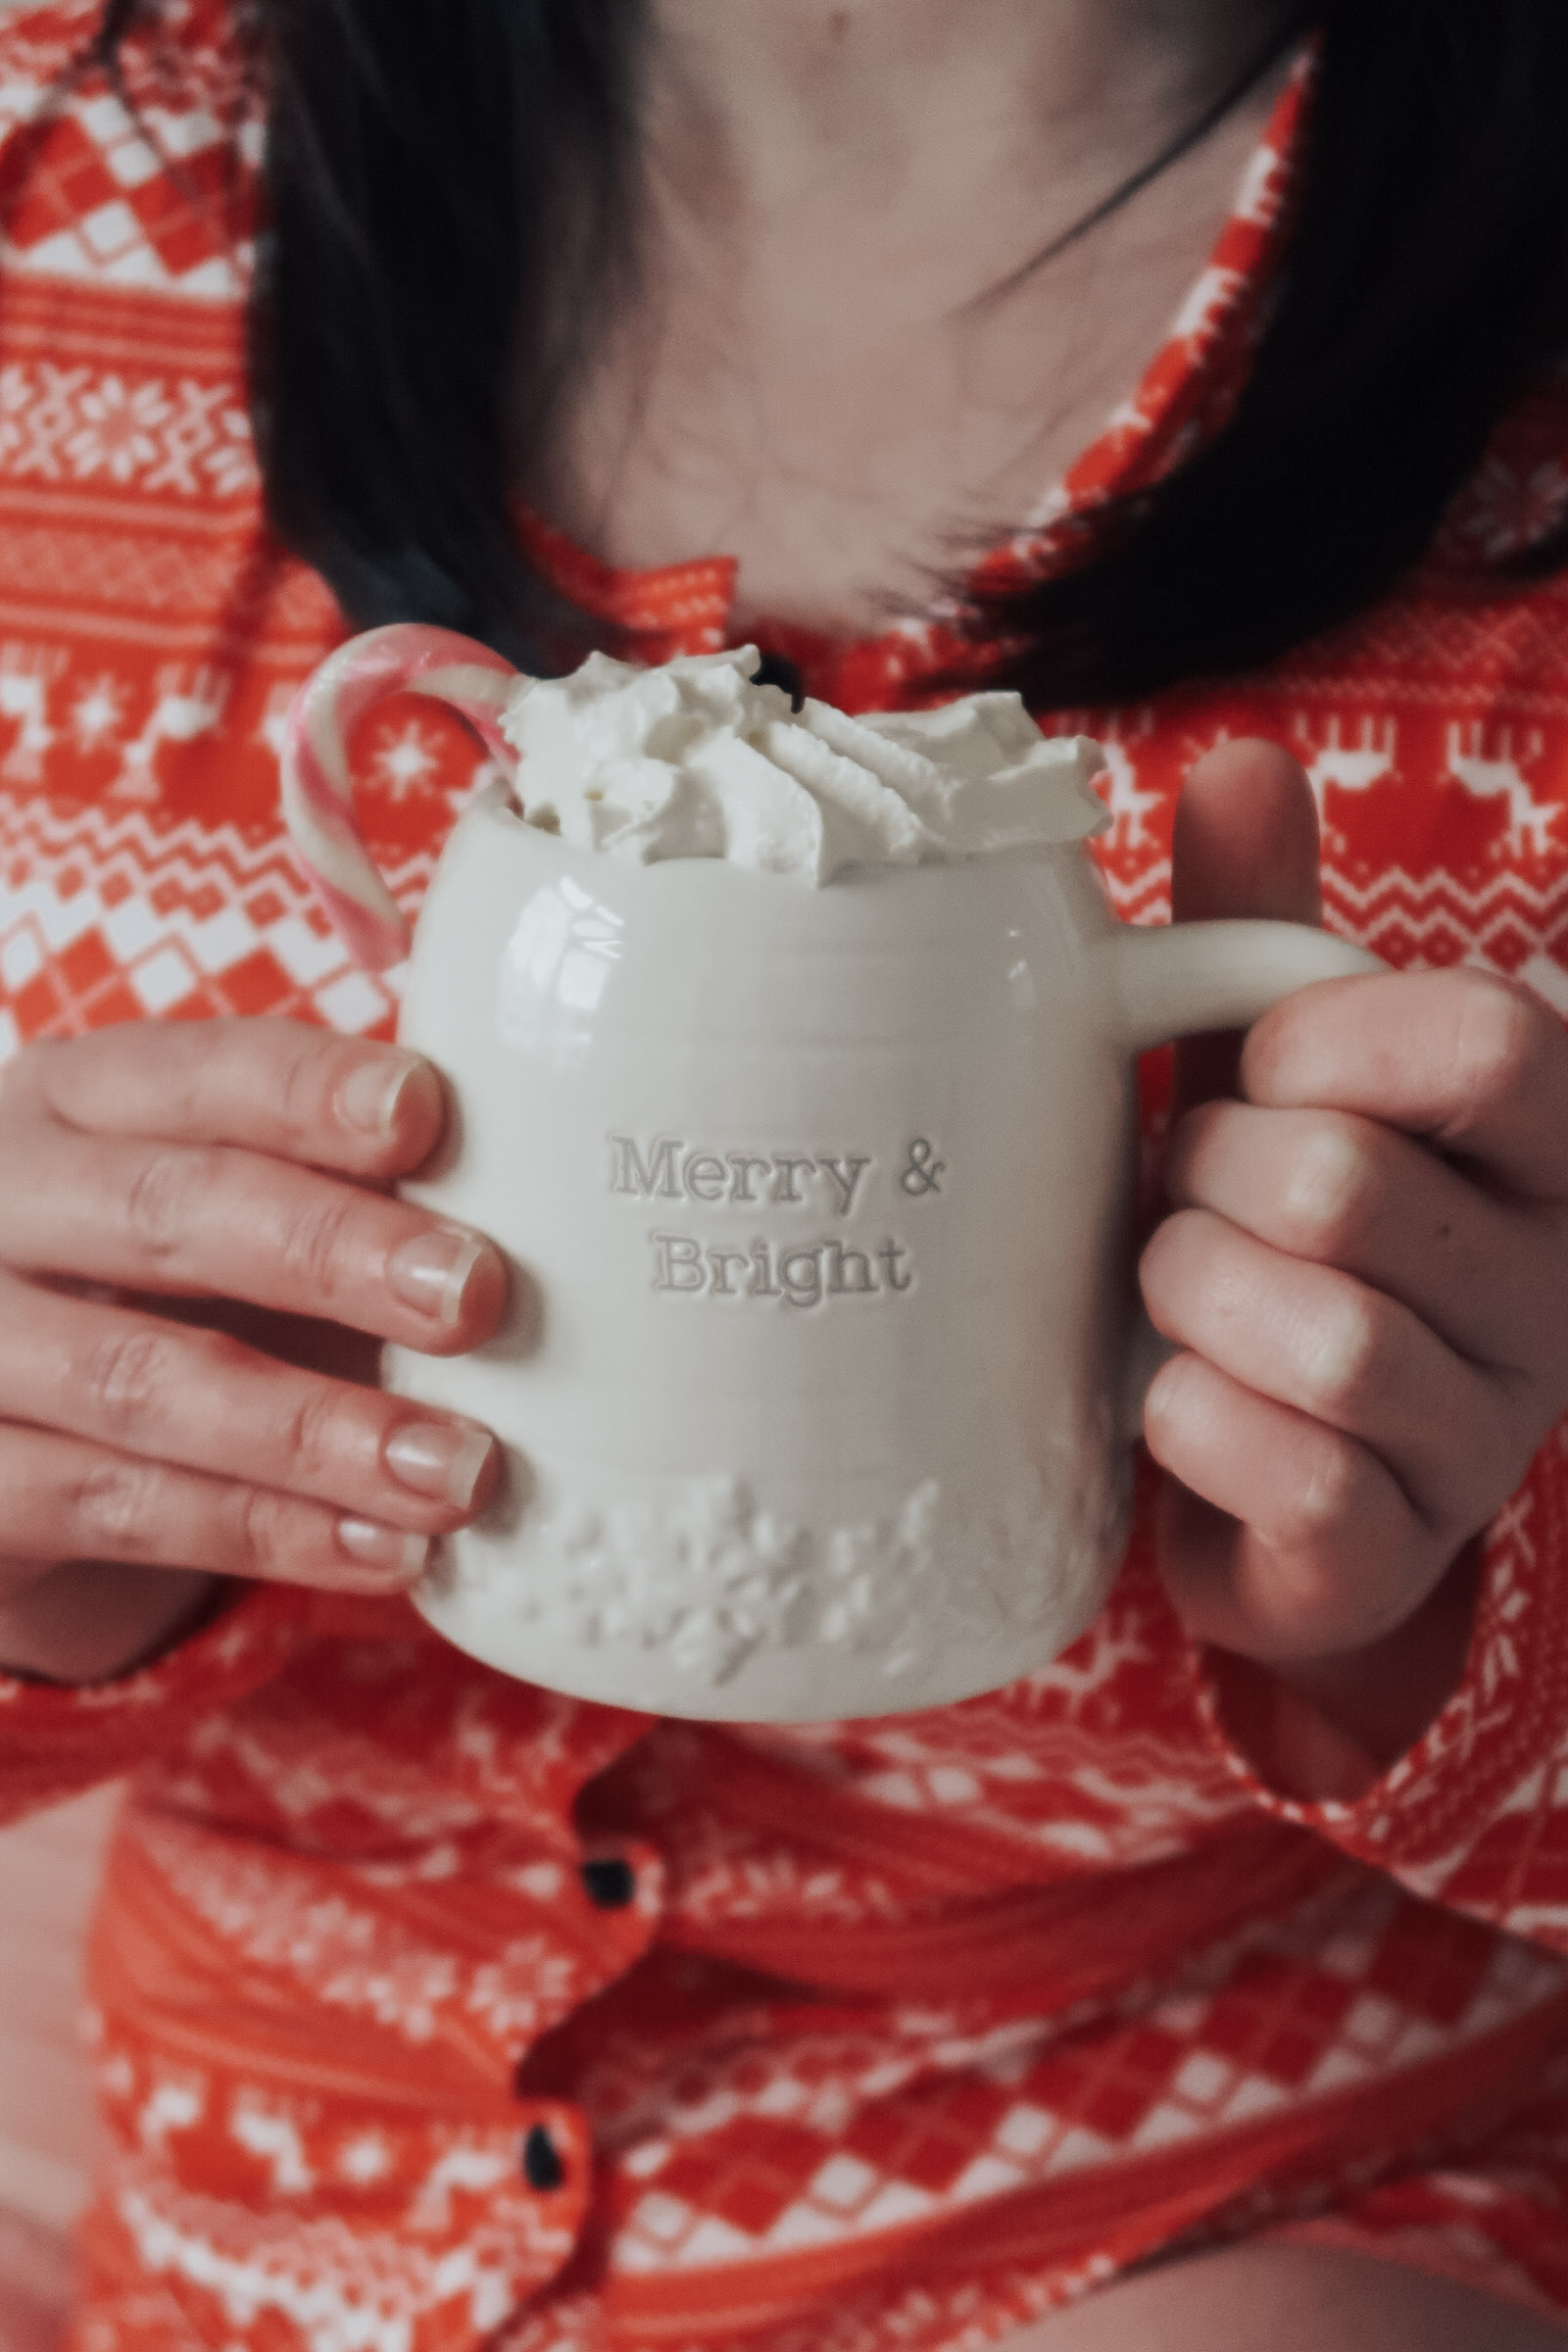 A Christmas mug with 'Merry & Bright' on it.